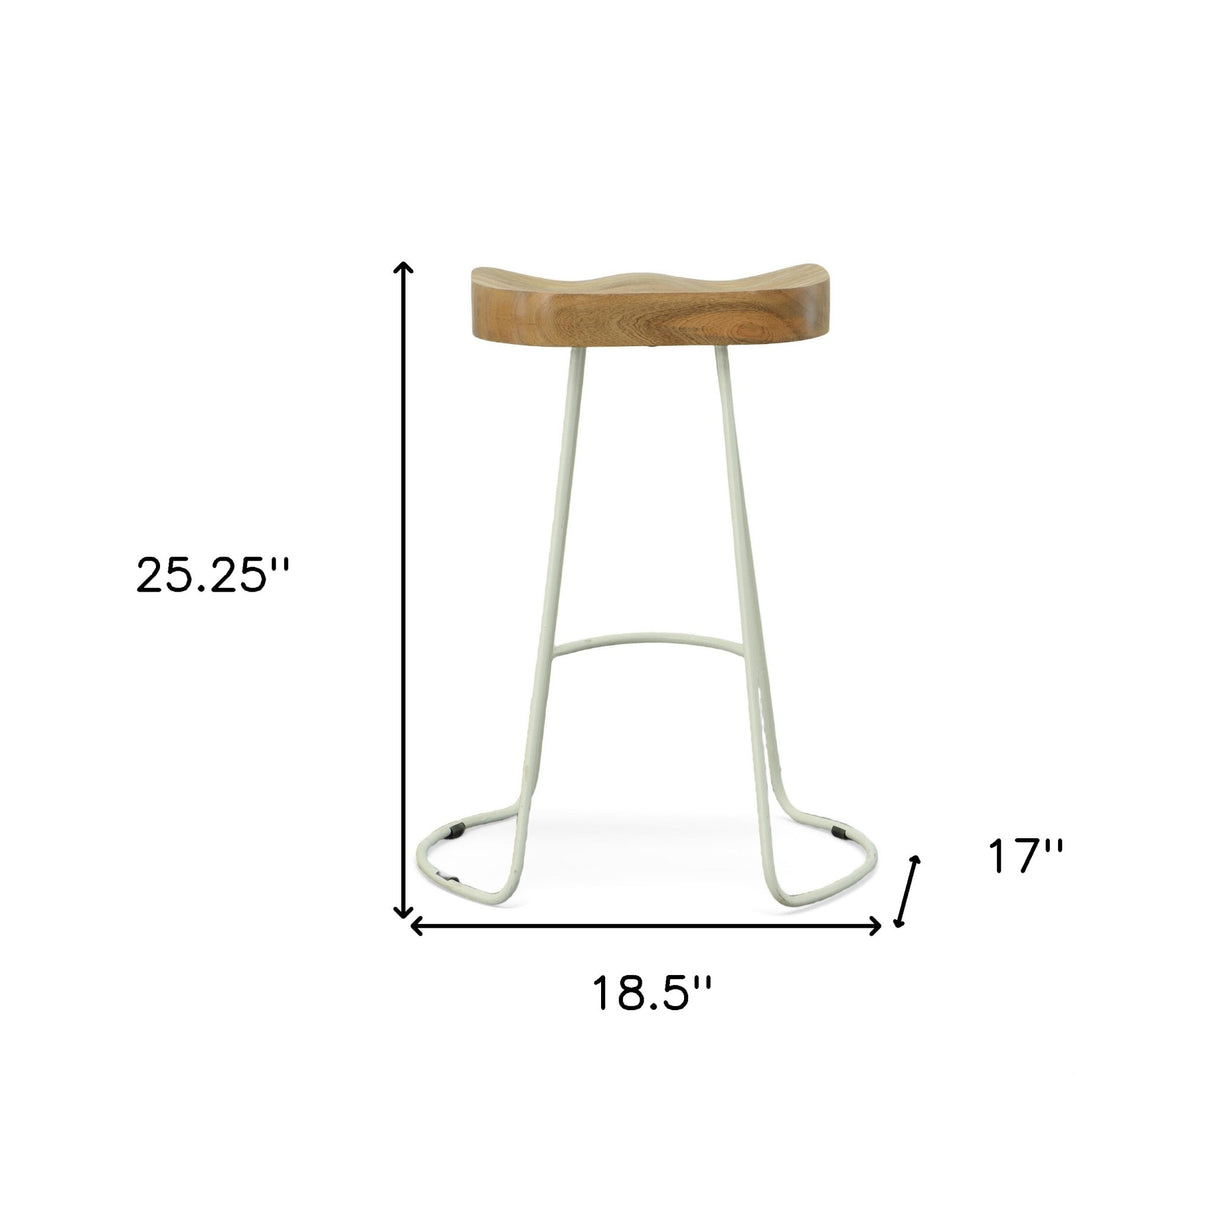 Set Of Two 25" Natural And White Steel Backless Counter Height Bar Chairs With Footrest